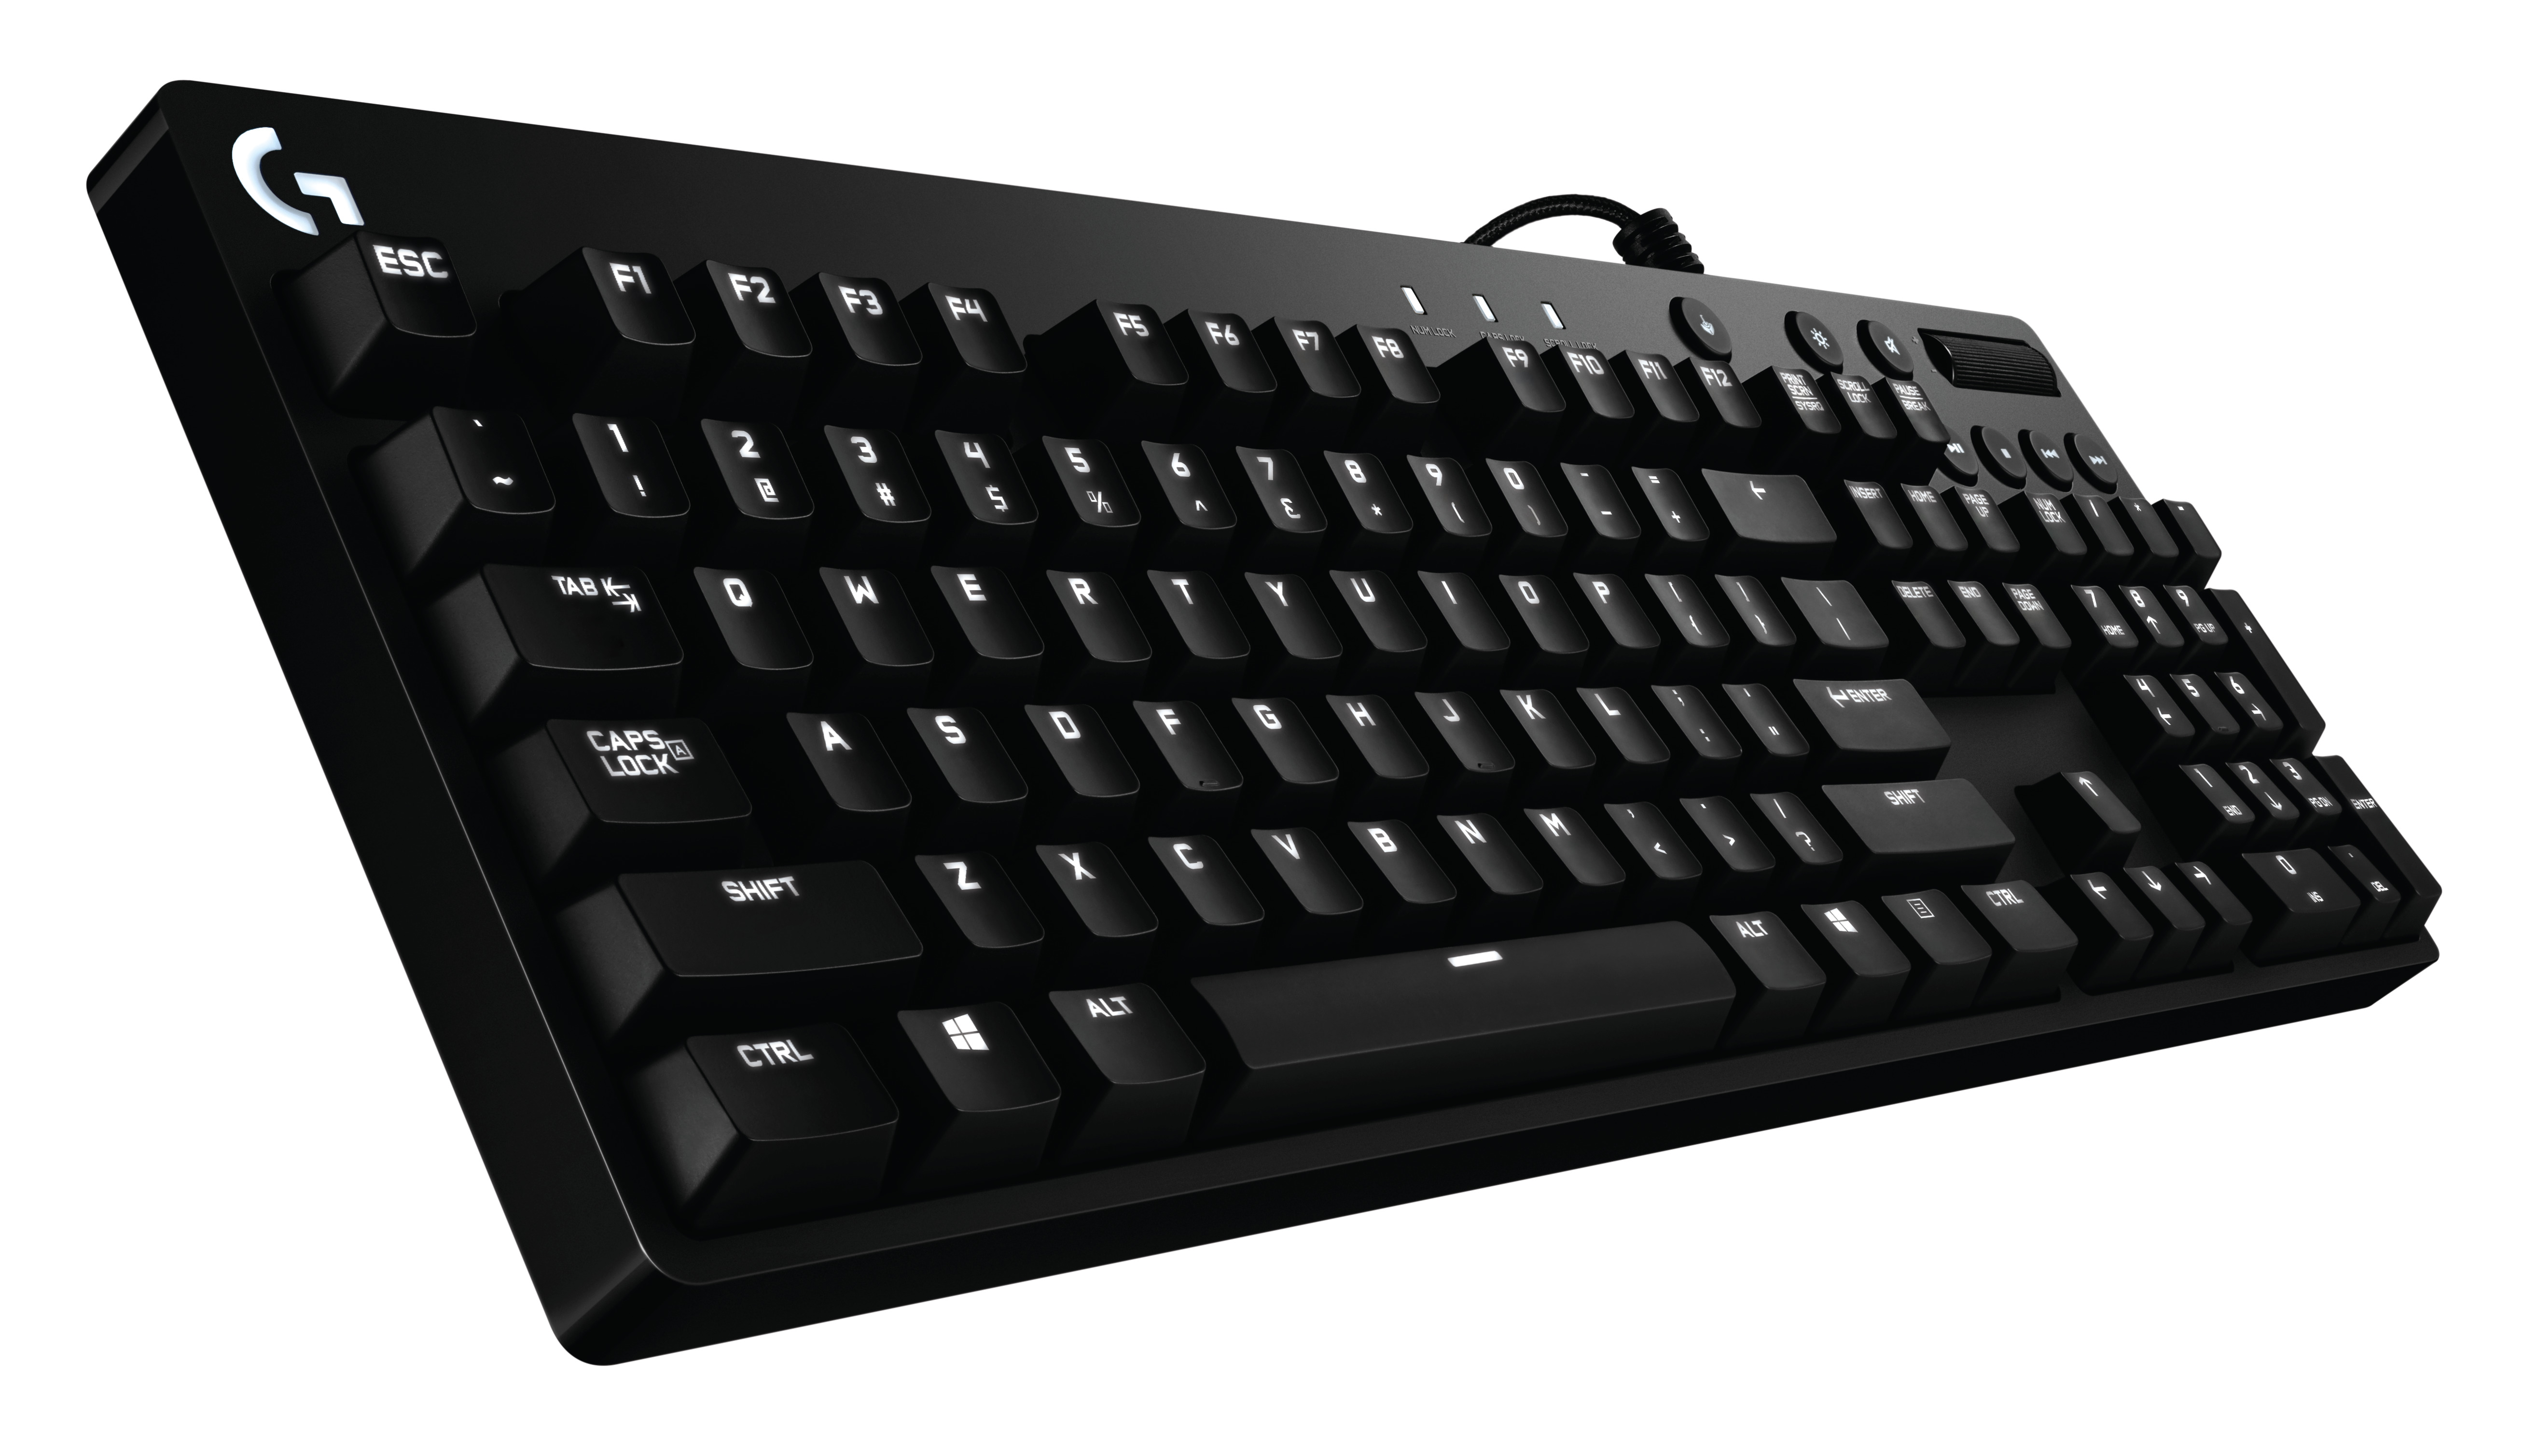 Logitech G610 Orion Brown Mechanical Gaming Keyboard to be available in Malaysia next month